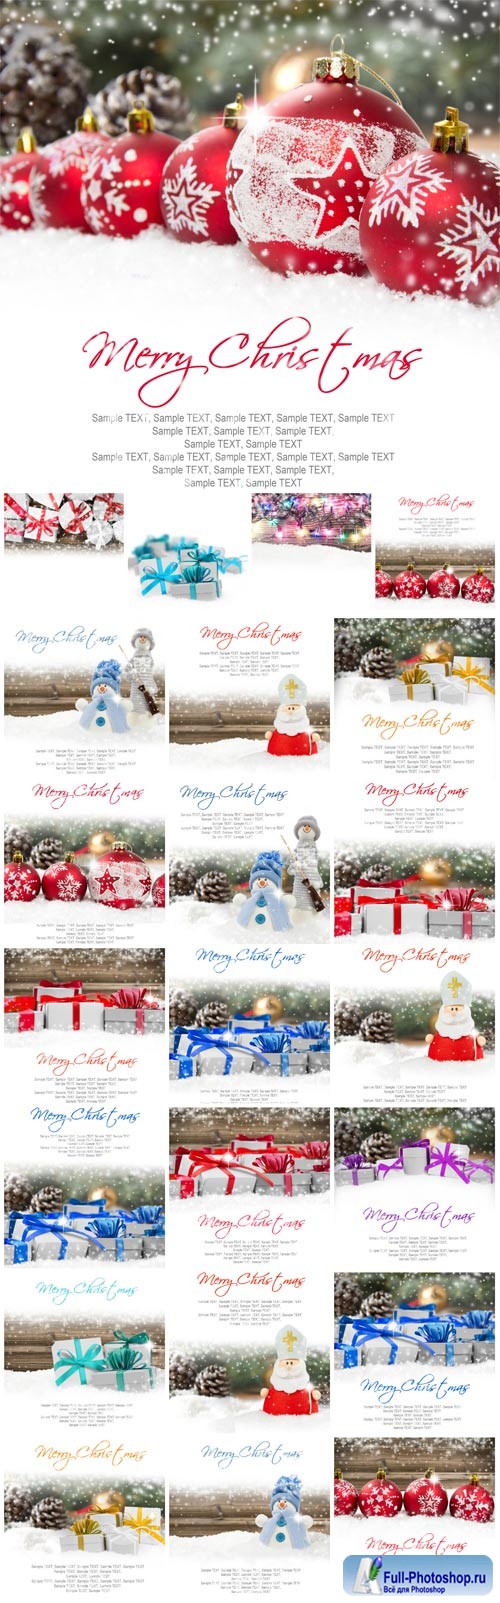 New Year and Christmas stock photos 15